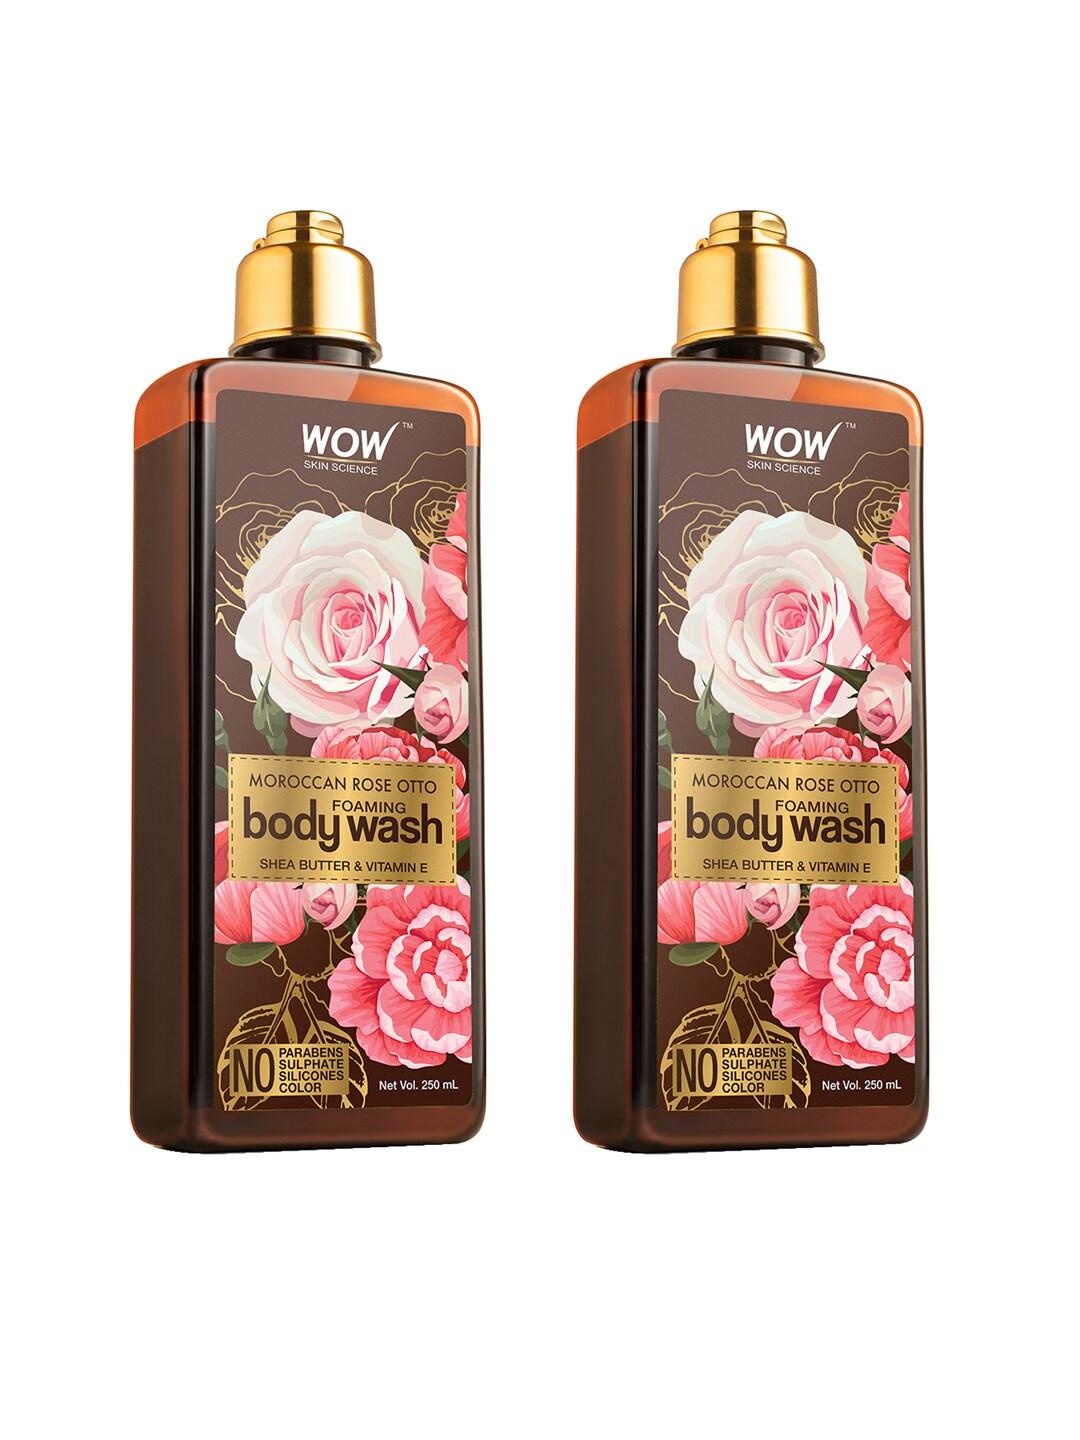 WOW SKIN SCIENCE Set of 2 Rose Otto Foaming Body Wash - 250 ml each